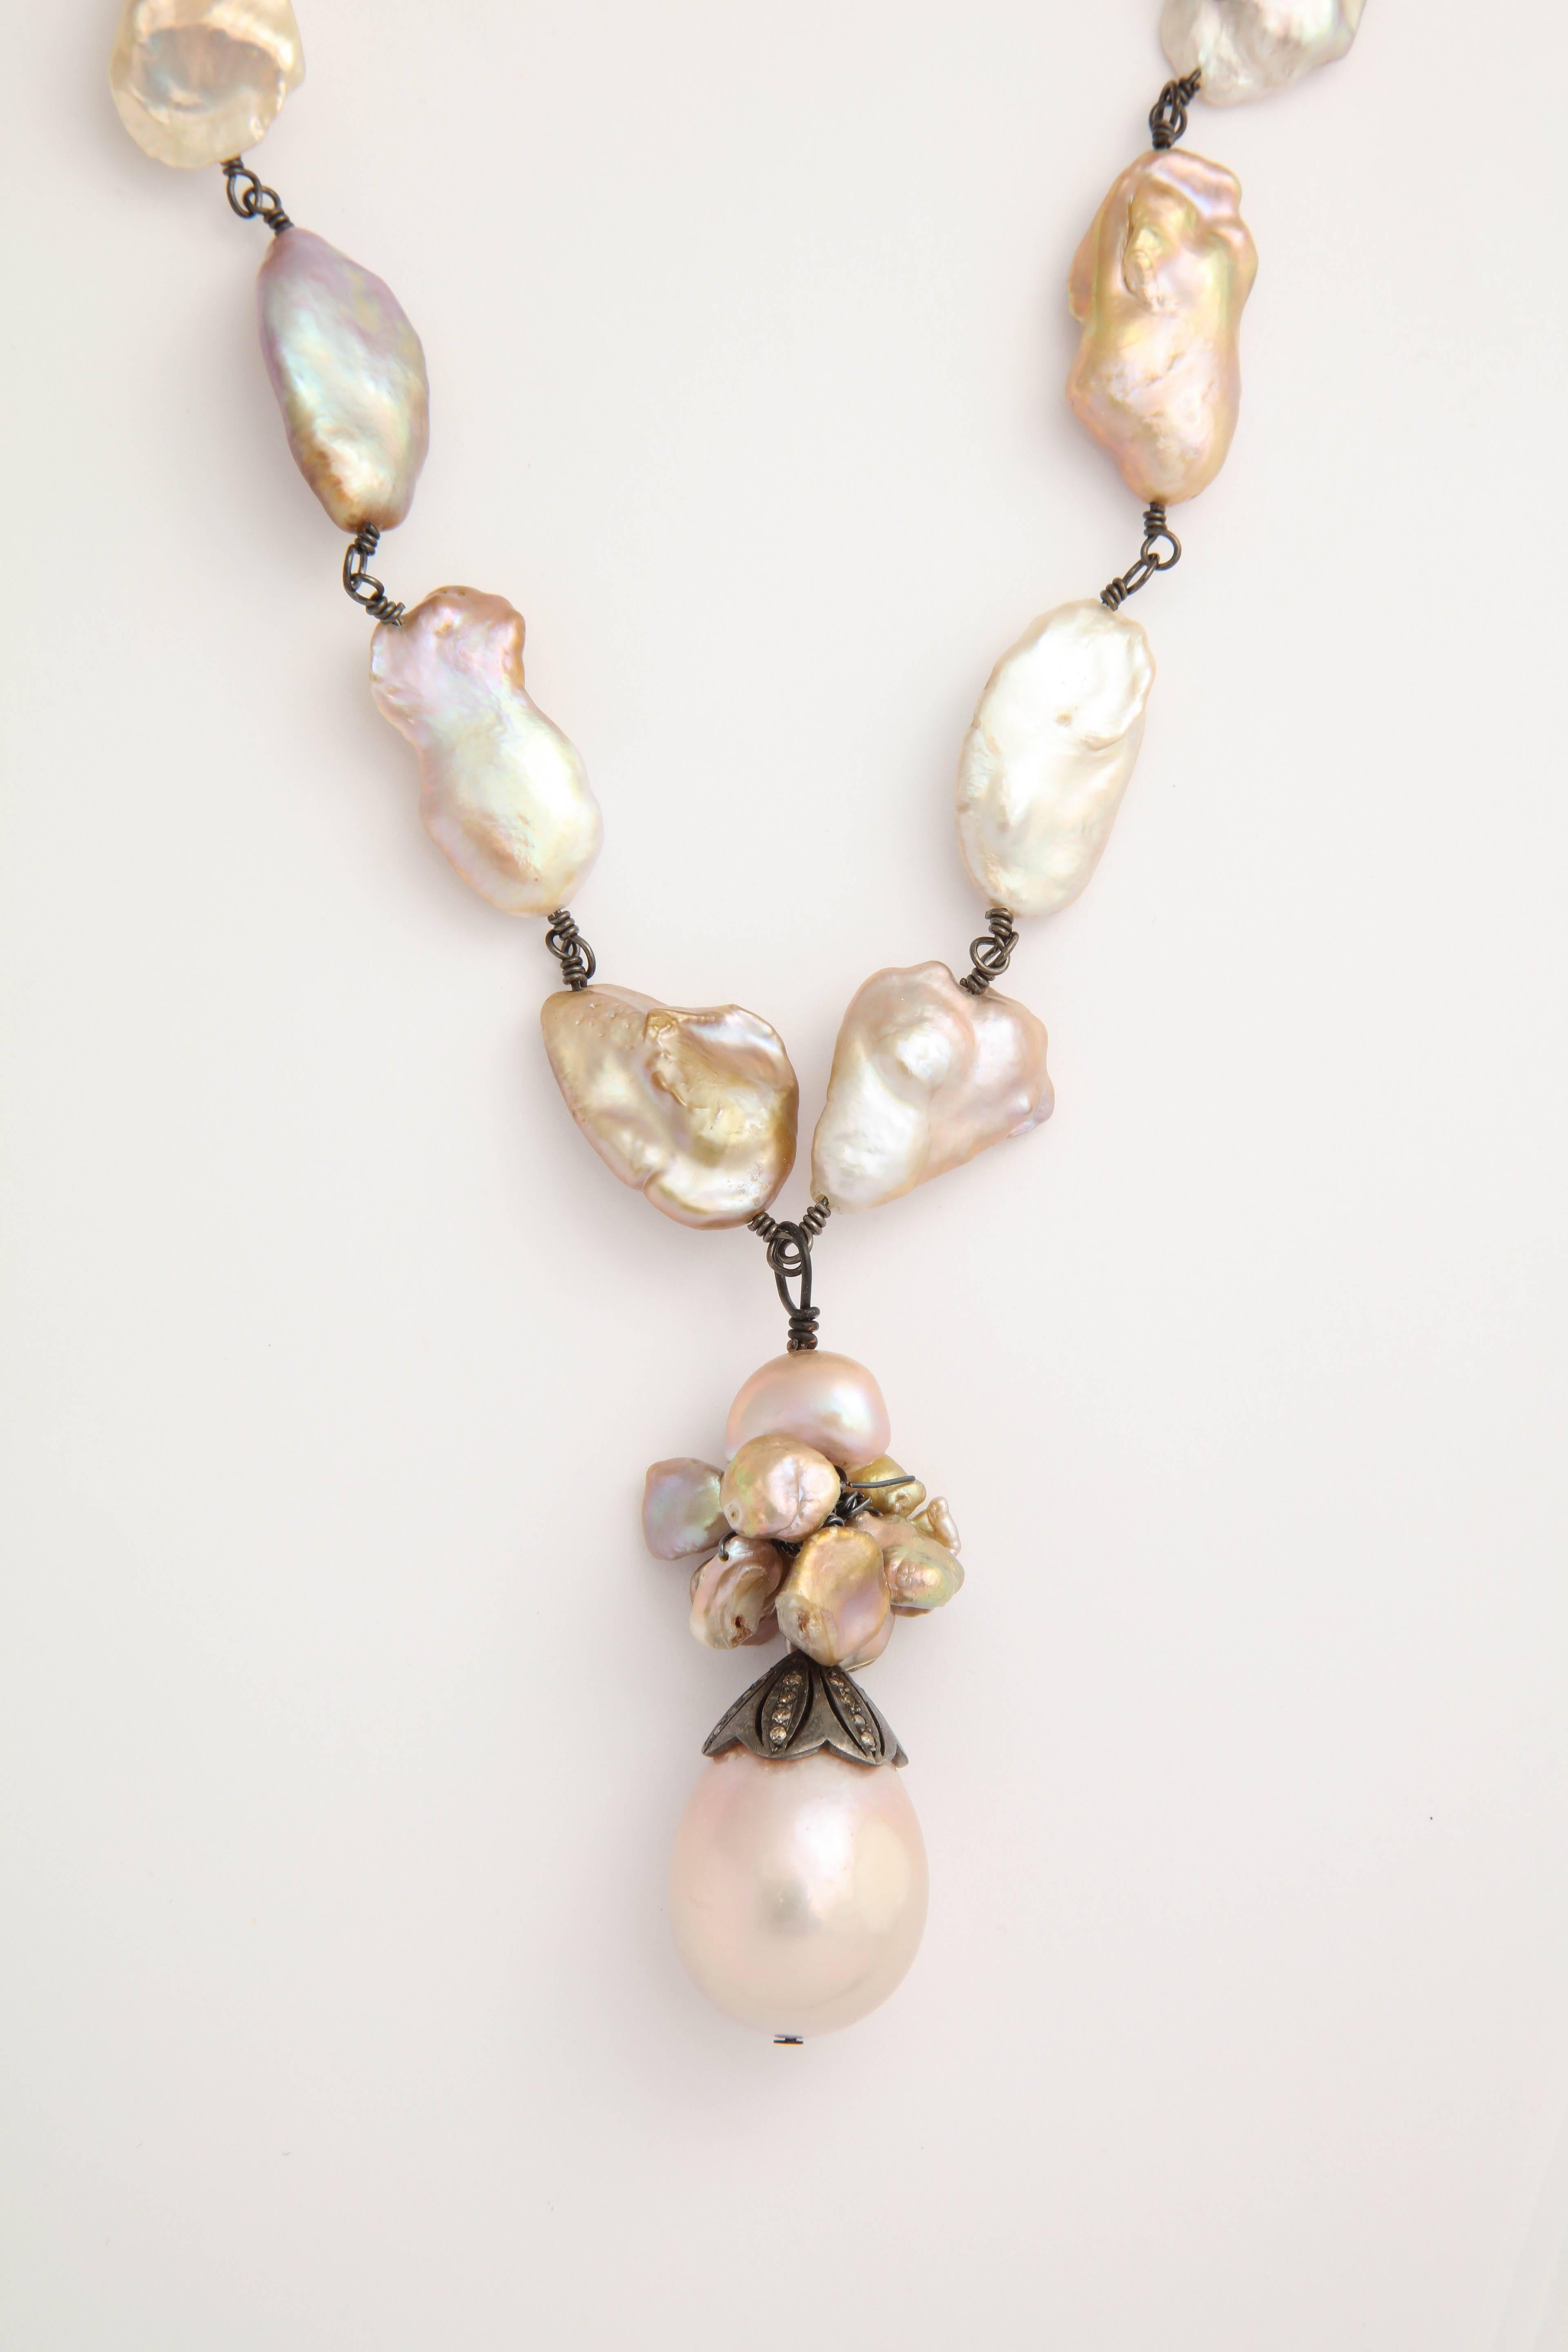 The oxidized silver wrapped necklace of pinkish baroque fresh water pearls is  36 in. long without the tassle. The tassle is made of smaller baroque pink pearl and a 3/4 in. X 1 in. pink pear shaped pearl topped by a silver and diamond pearl cap.